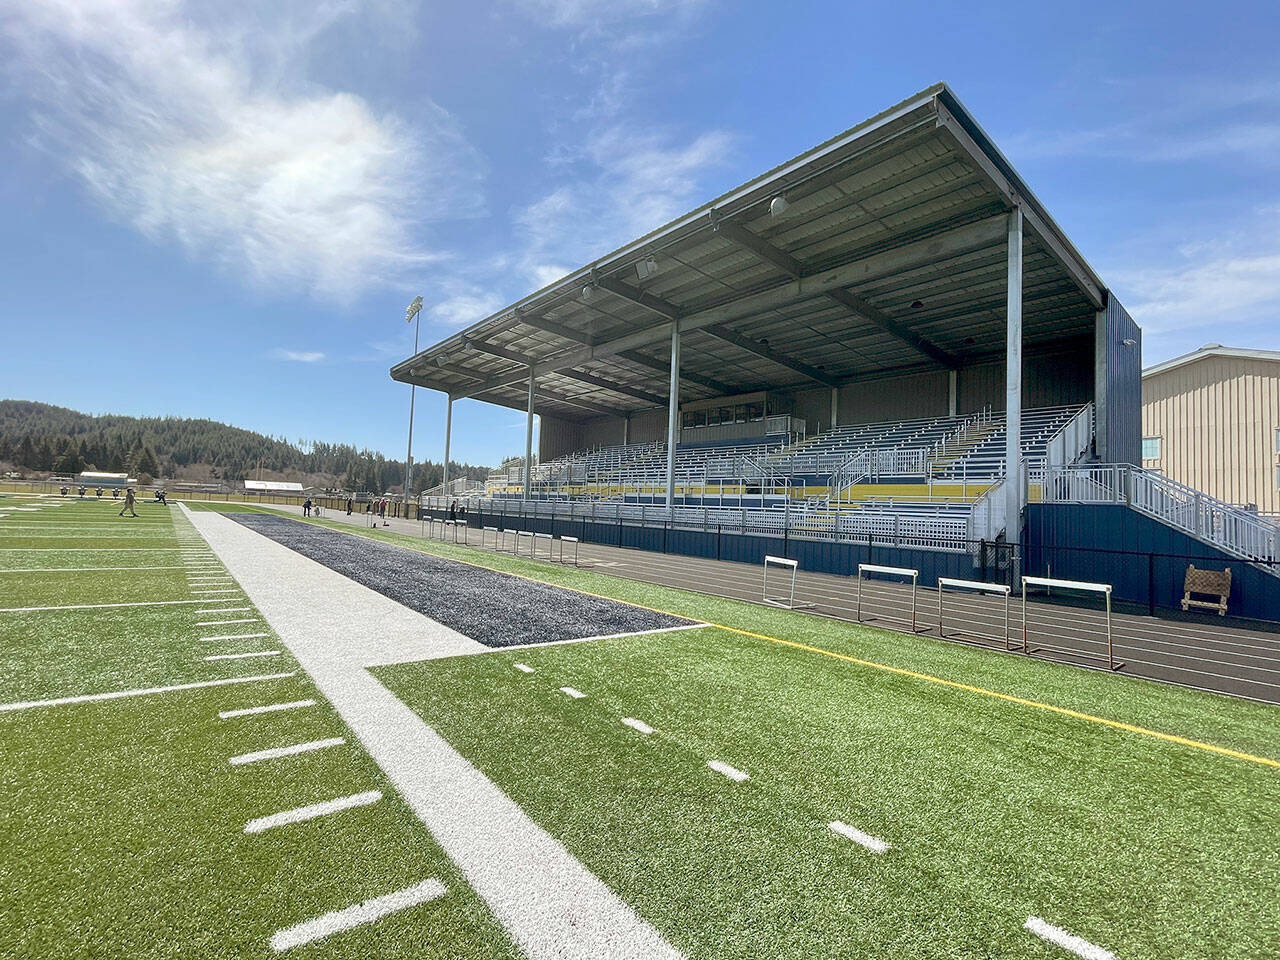 Phase I work on Spartan Stadium is nearing completion in anticipation of the ribbon cutting on April 14. The $2.5 million complex had been scheduled to open in October, but supply chain problems, poor weather and materials delivery delayed construction. (Paula Hunt/Peninsula Daily News)